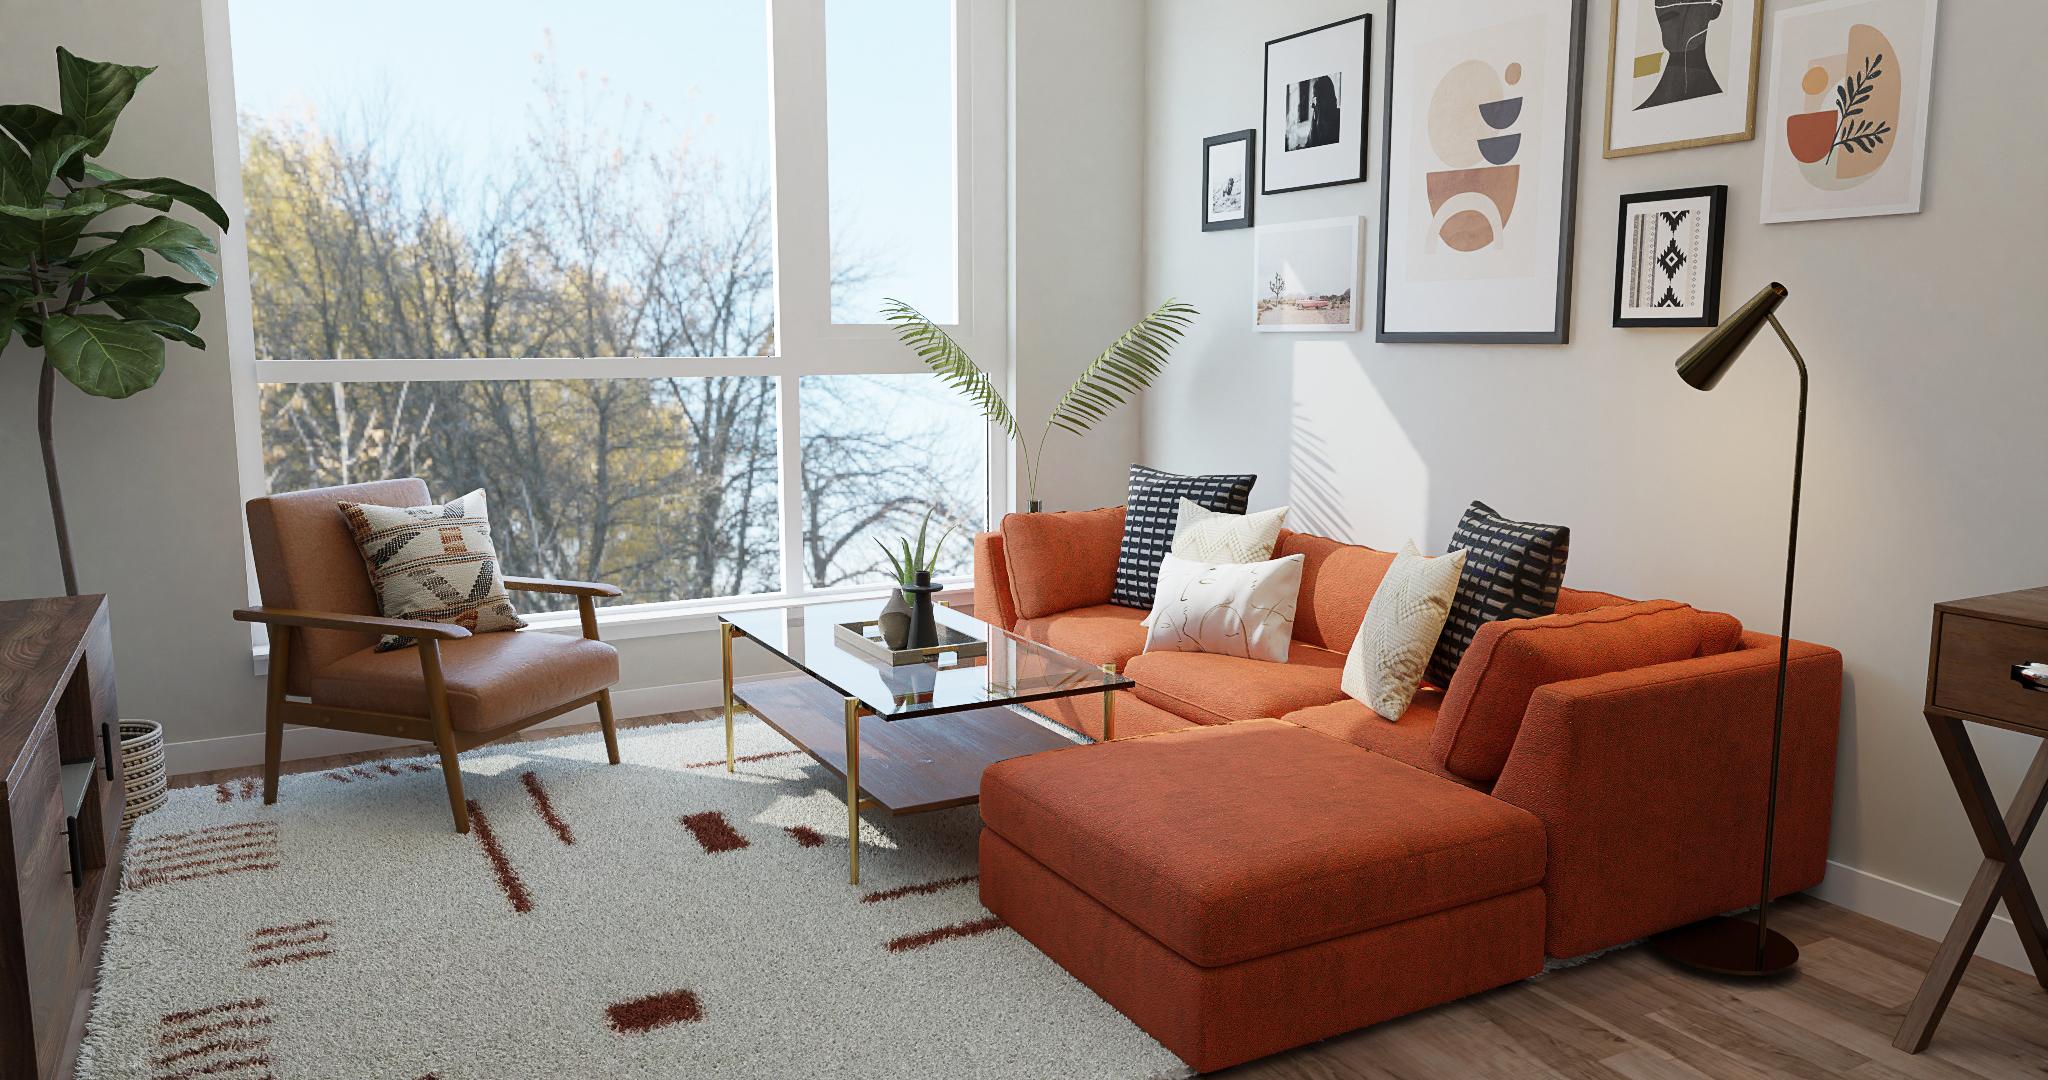 A Modern Living-Dining Room In Tangerine Colors